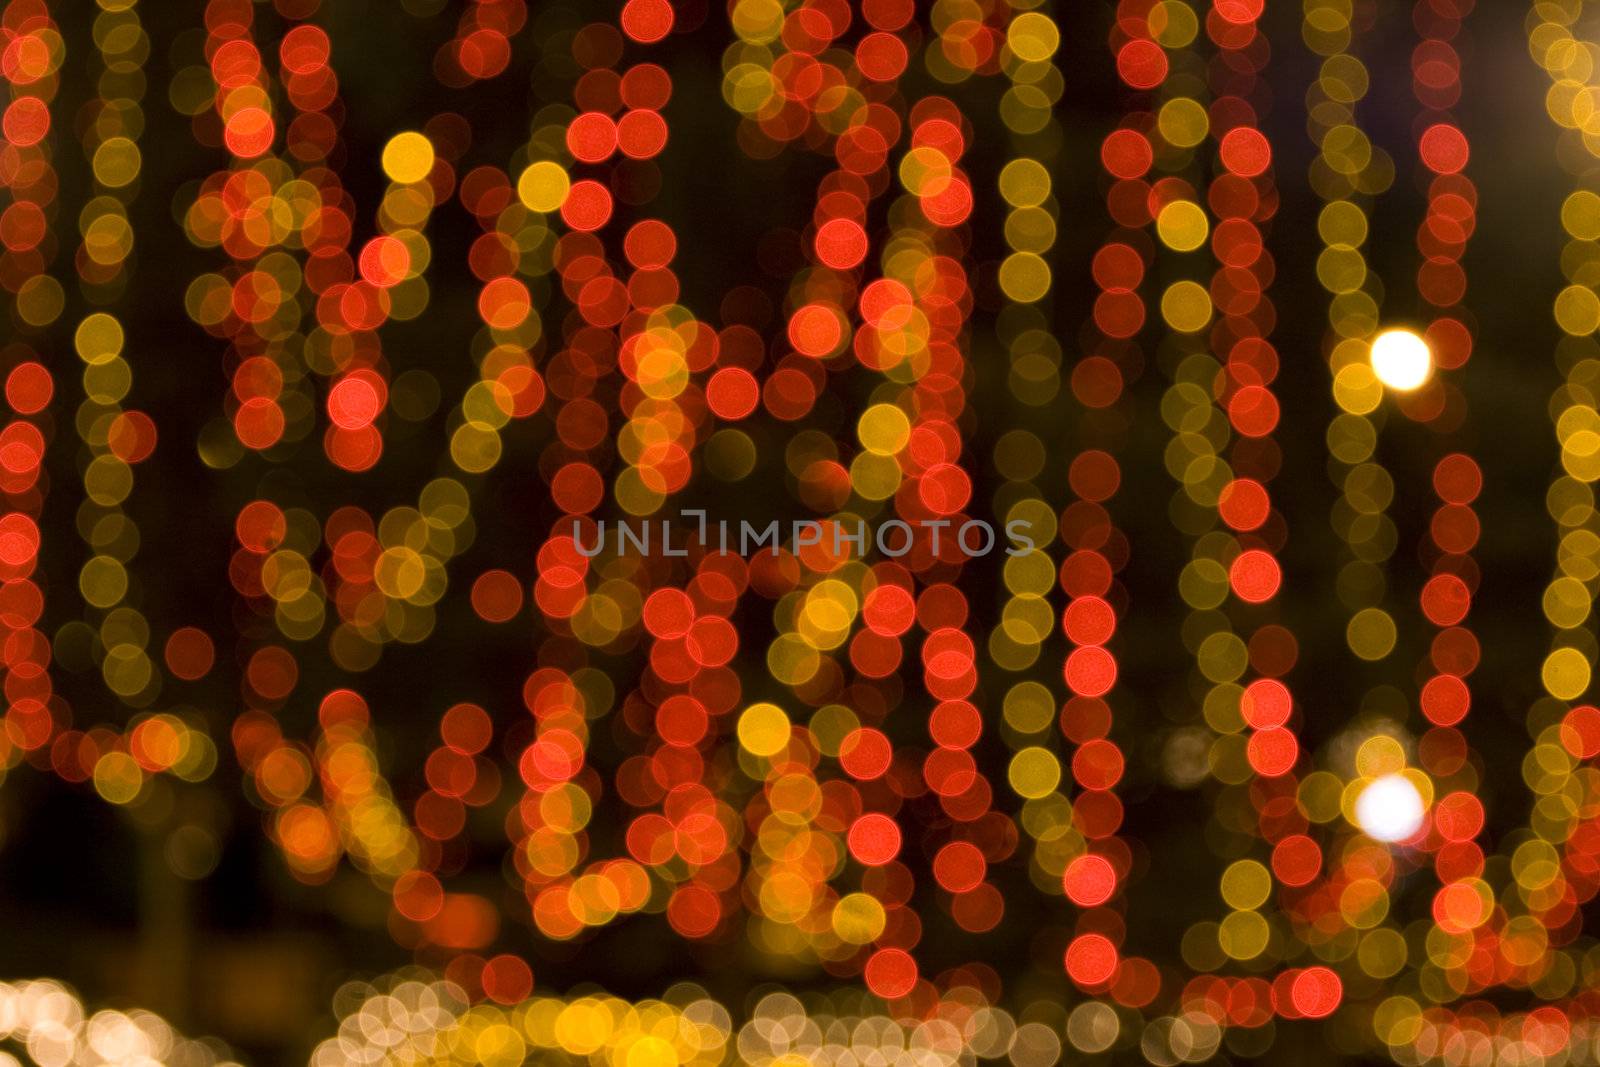 Out of focus lights at night in wintertime.